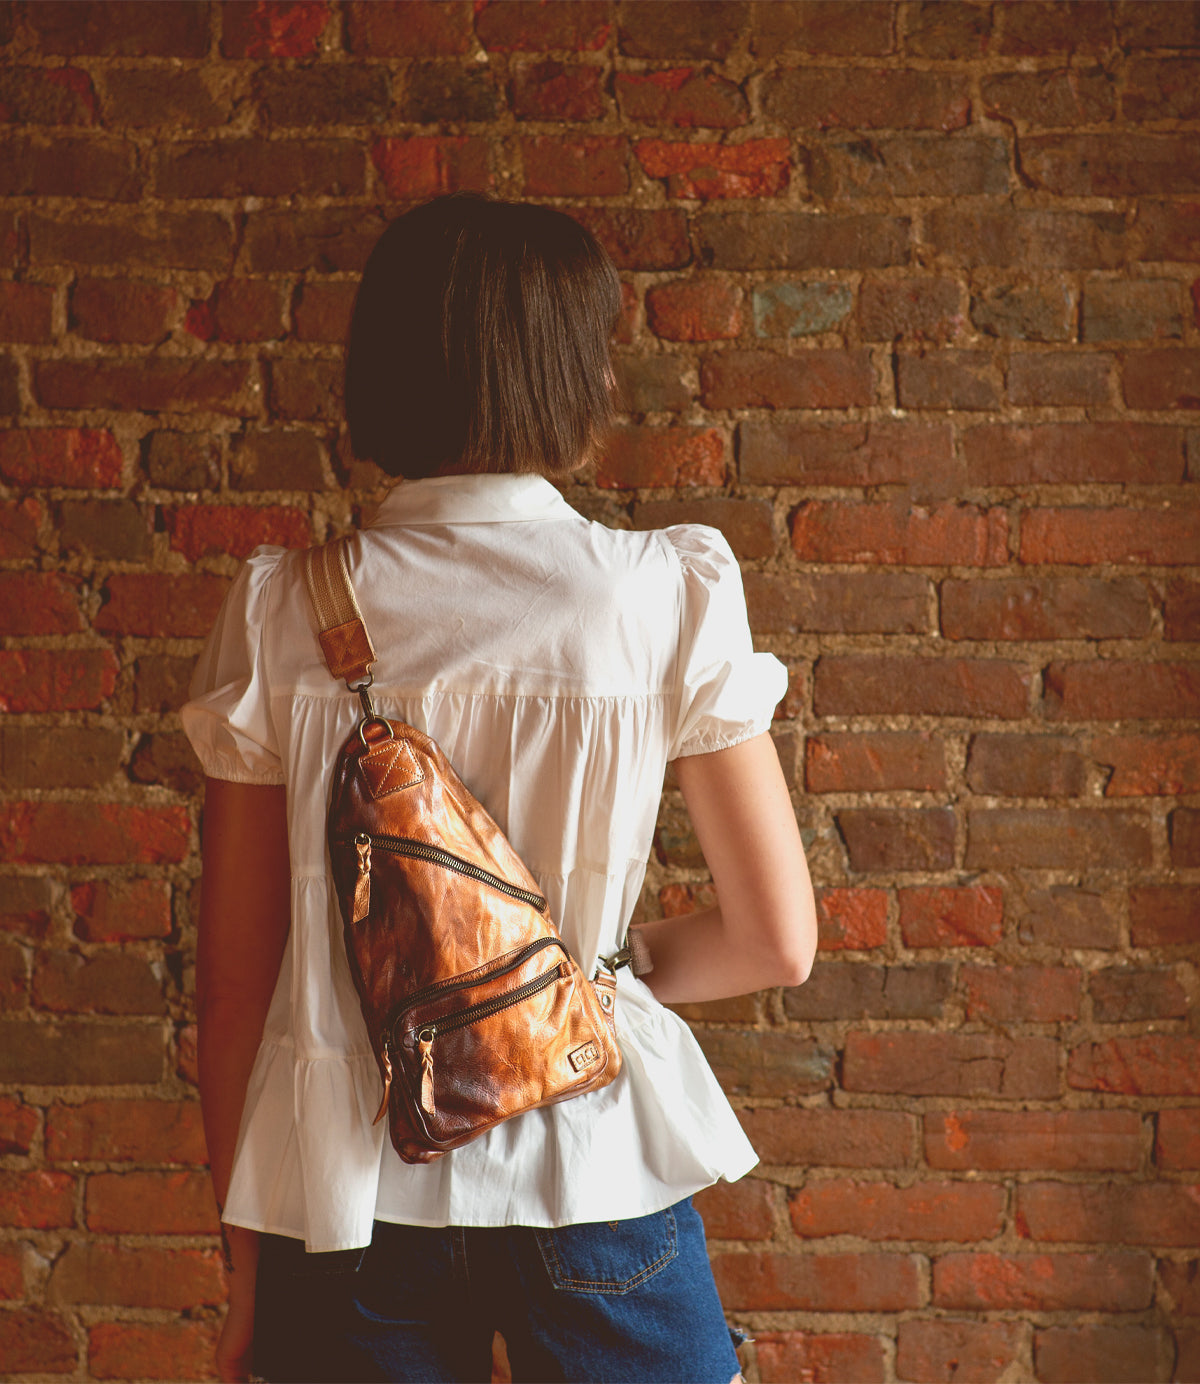 A practical woman with the versatile Bed Stu Andie leather sling bag poses in front of a brick wall.